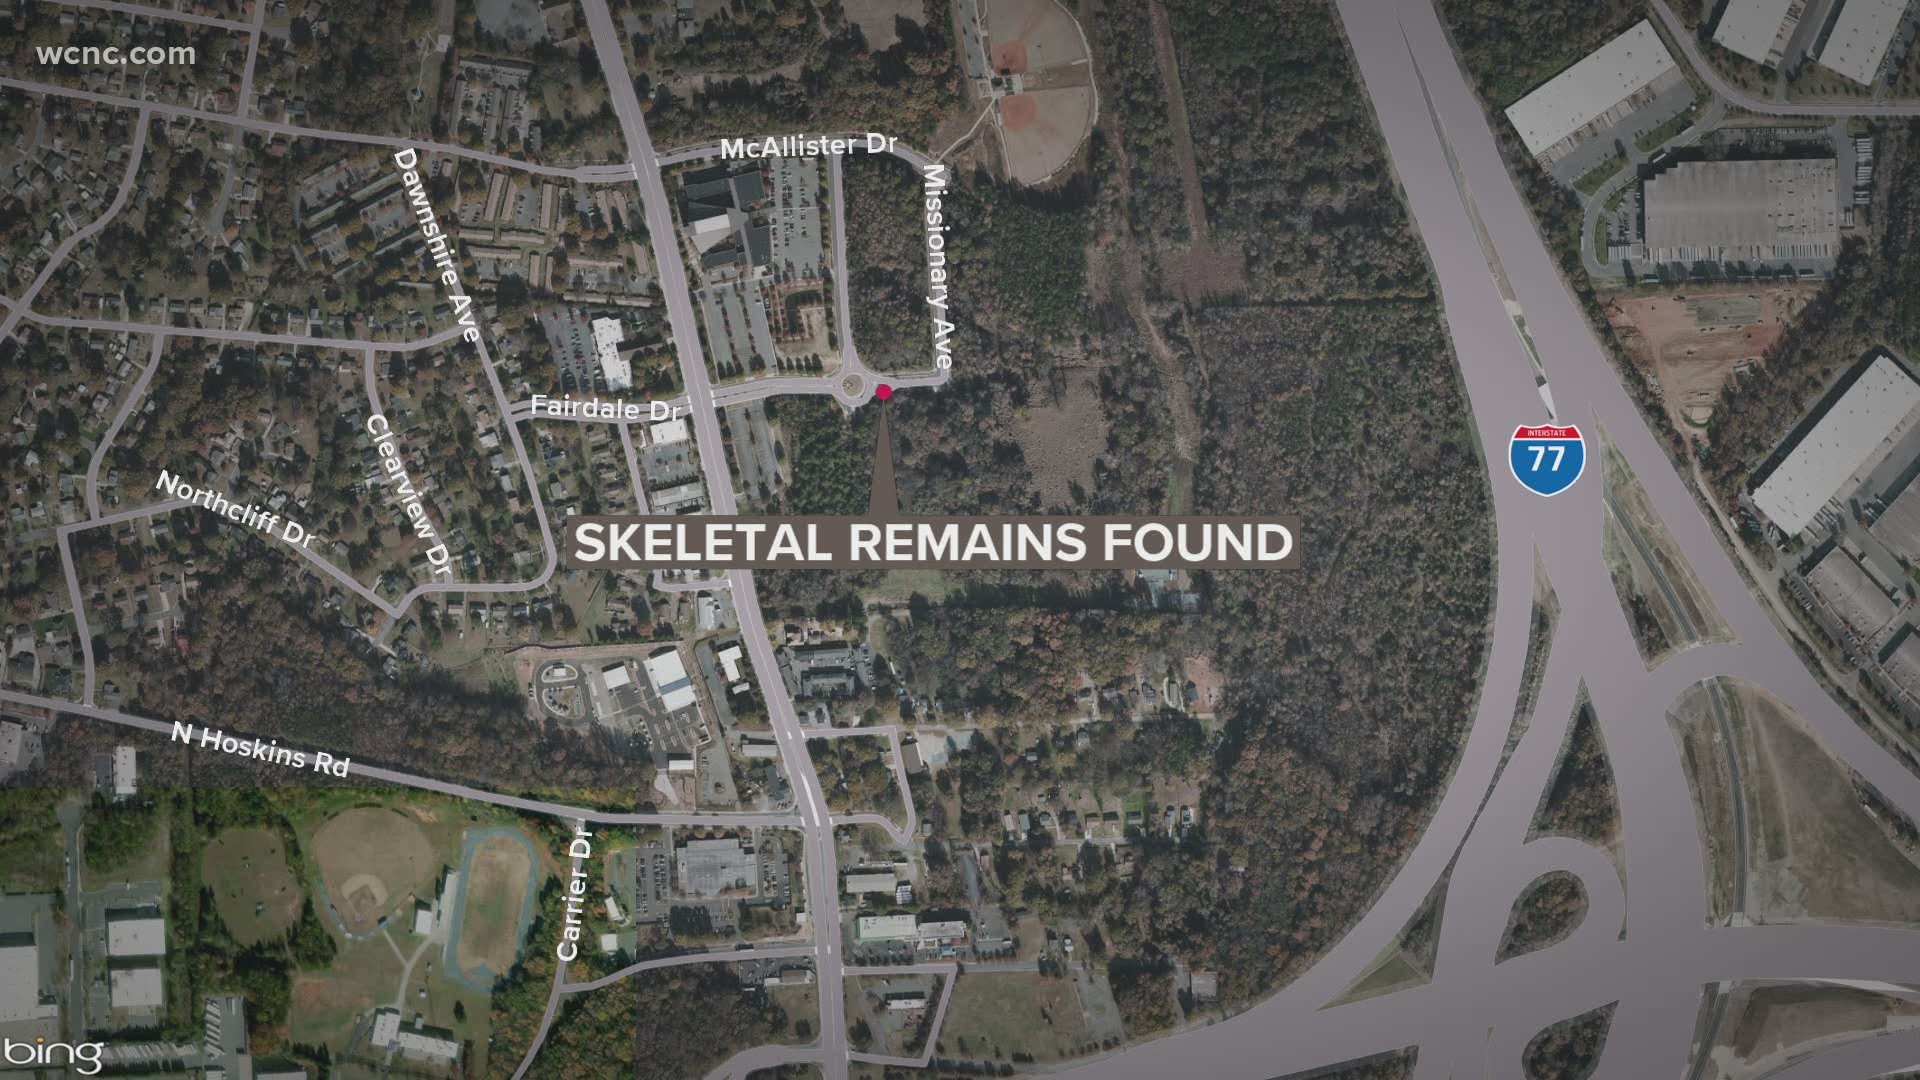 Skeletal, human remains were found Sunday in a wooded area of northwest Charlotte, the Charlotte Mecklenburg Police Department announced Monday.